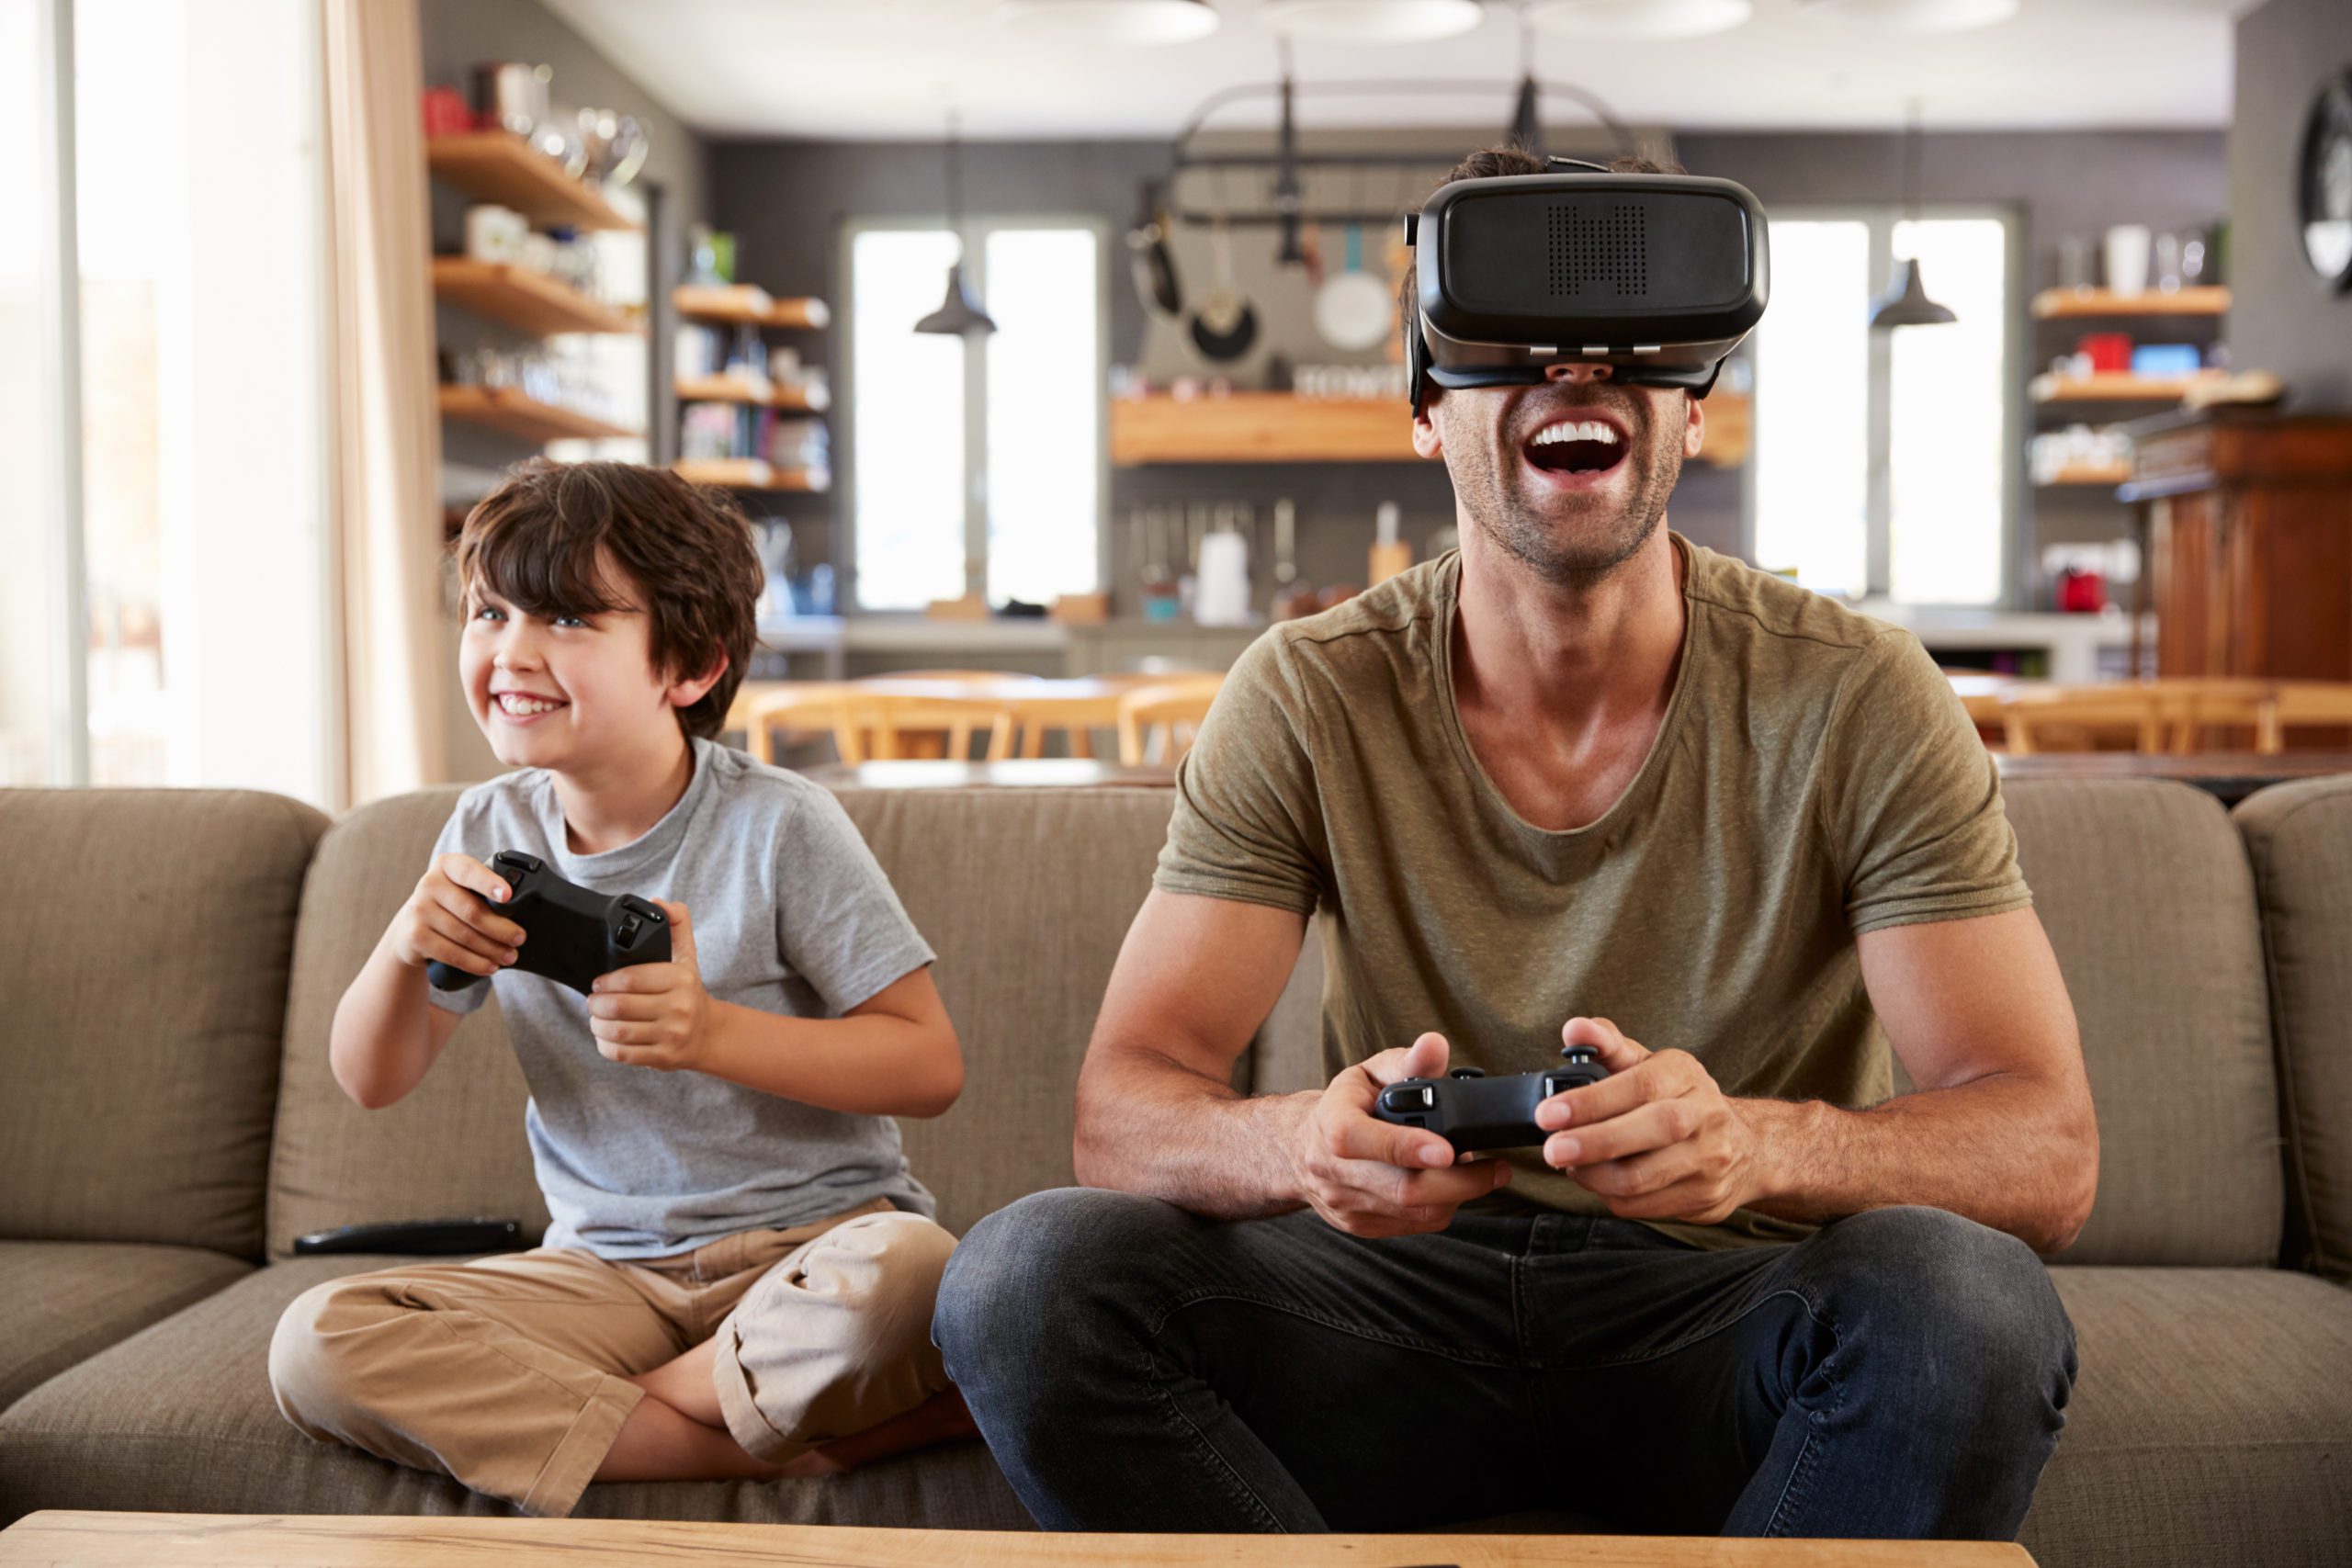 Wearable gaming devices can enhance video gameplay.